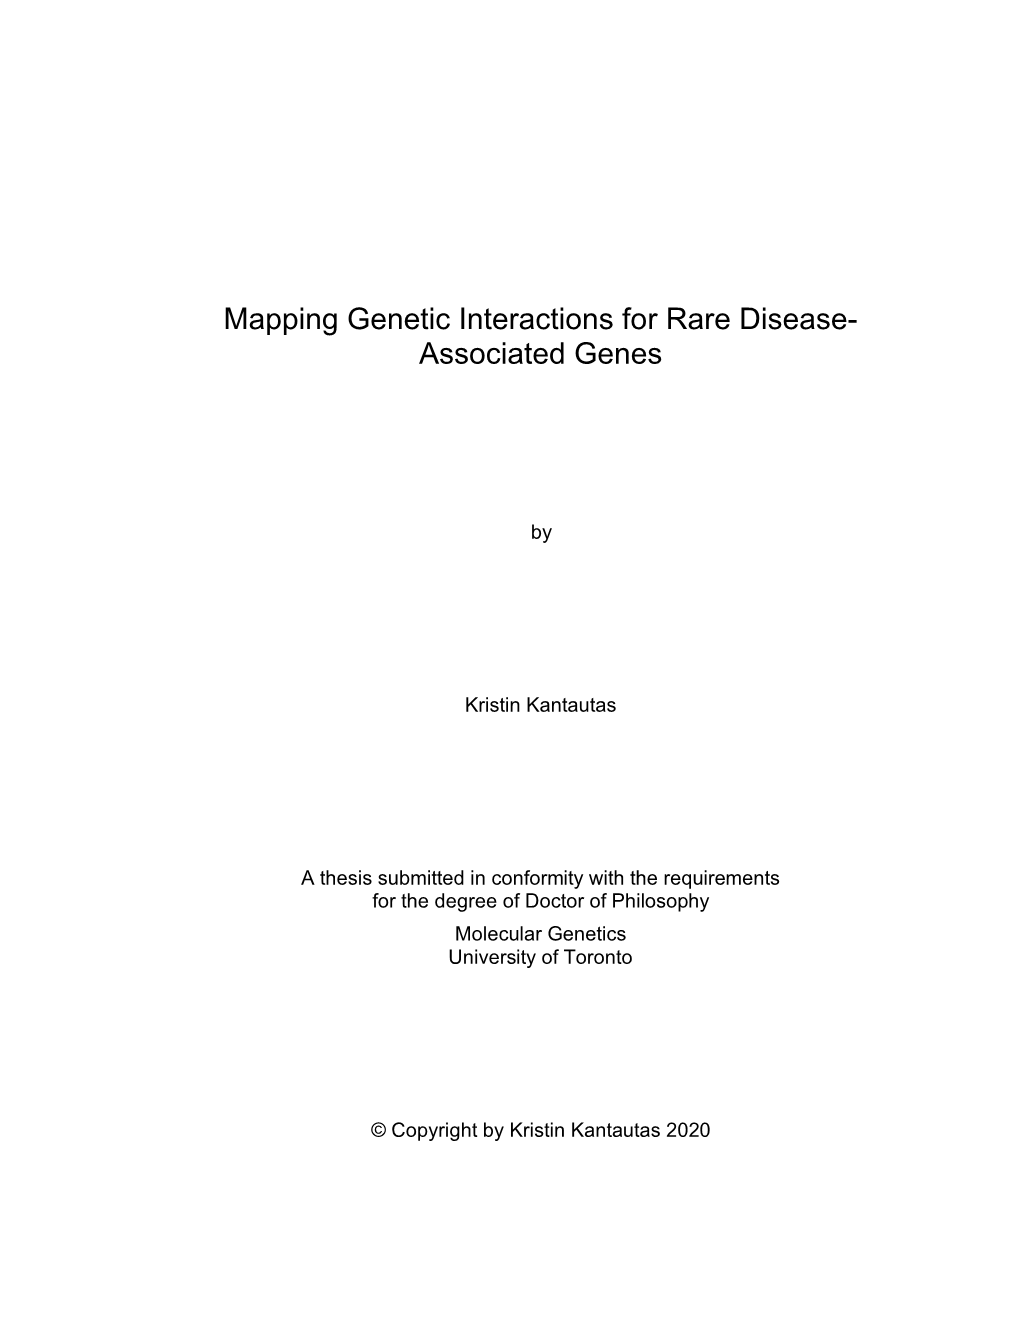 Mapping Genetic Interactions for Rare Disease- Associated Genes